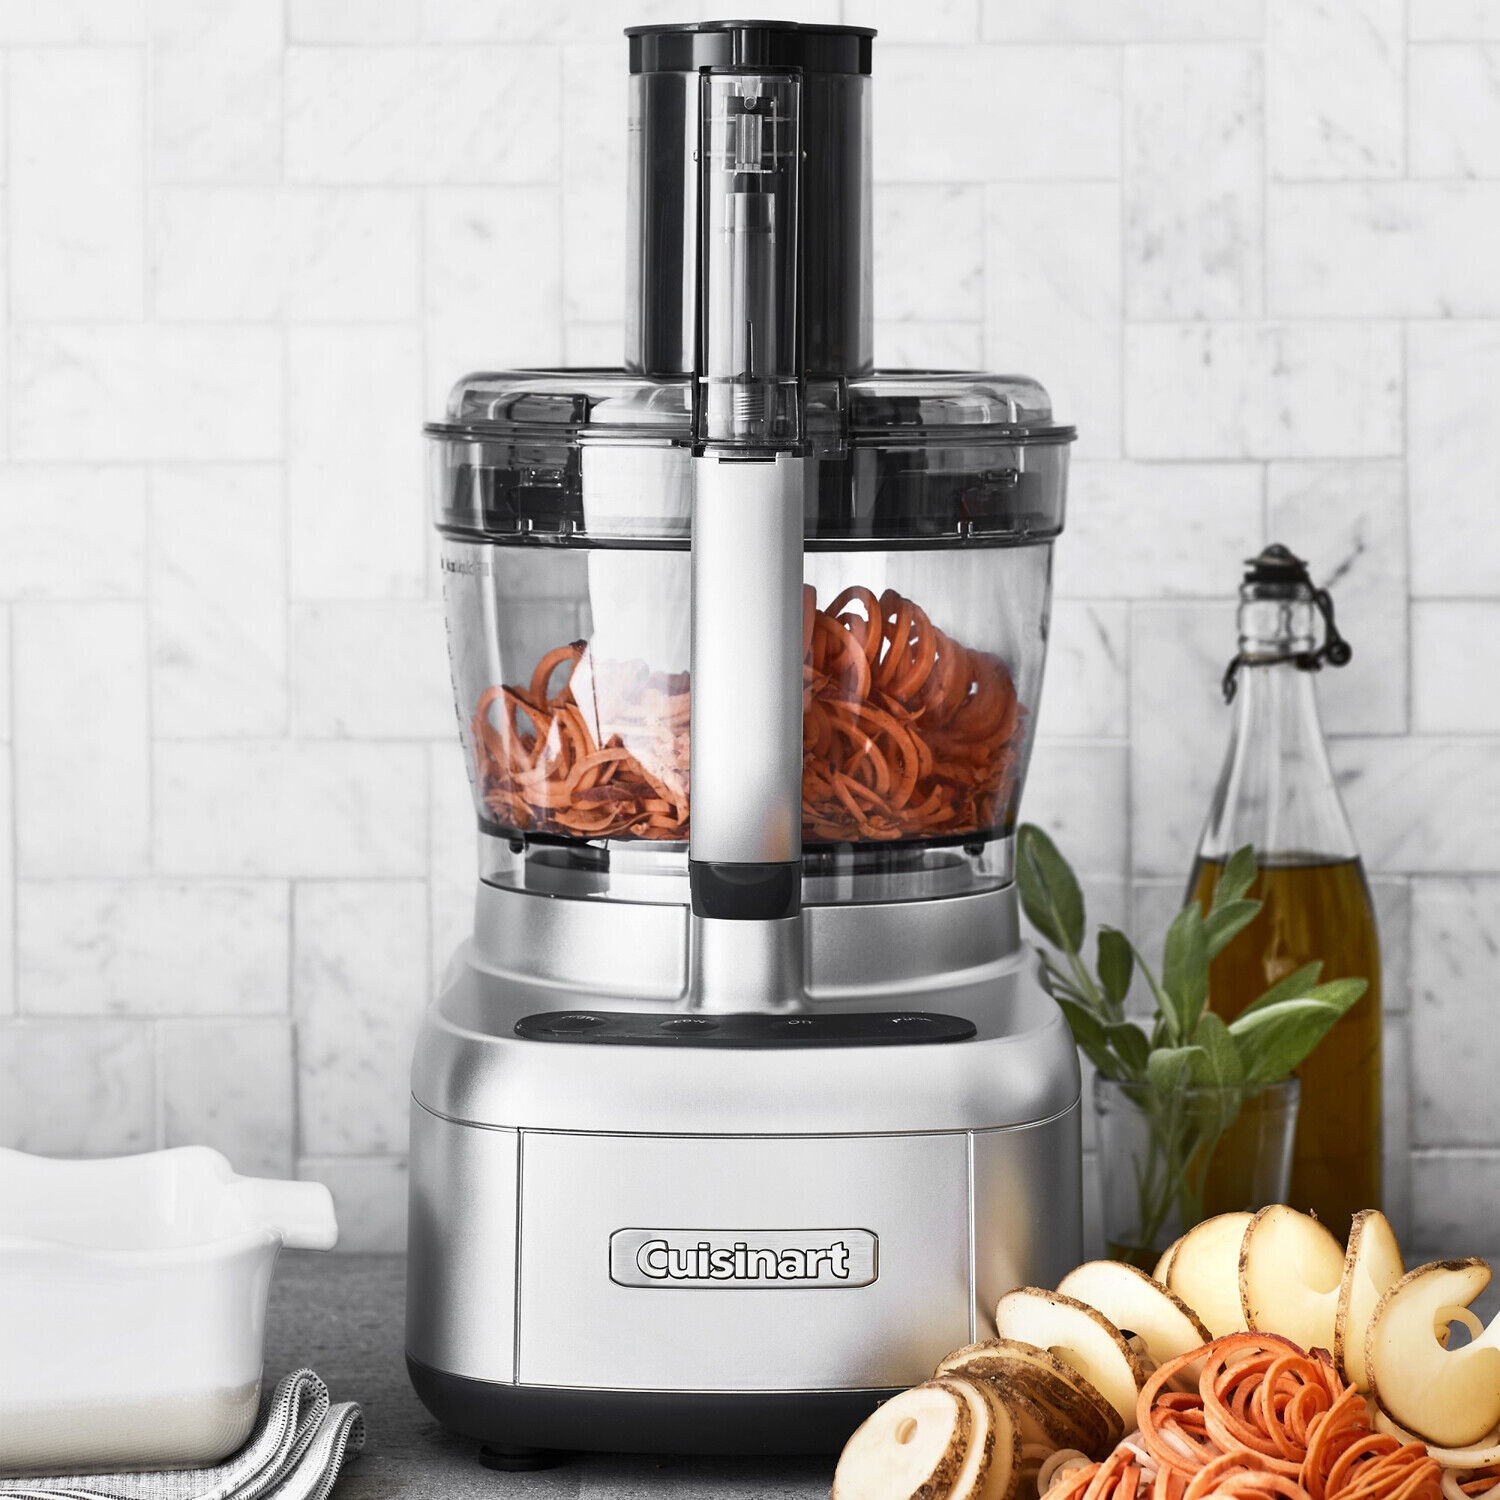 https://storables.com/wp-content/uploads/2023/08/14-incredible-cuisinart-elemental-13-cup-food-processor-with-spiralizer-dicer-for-2023-1691026726.jpg